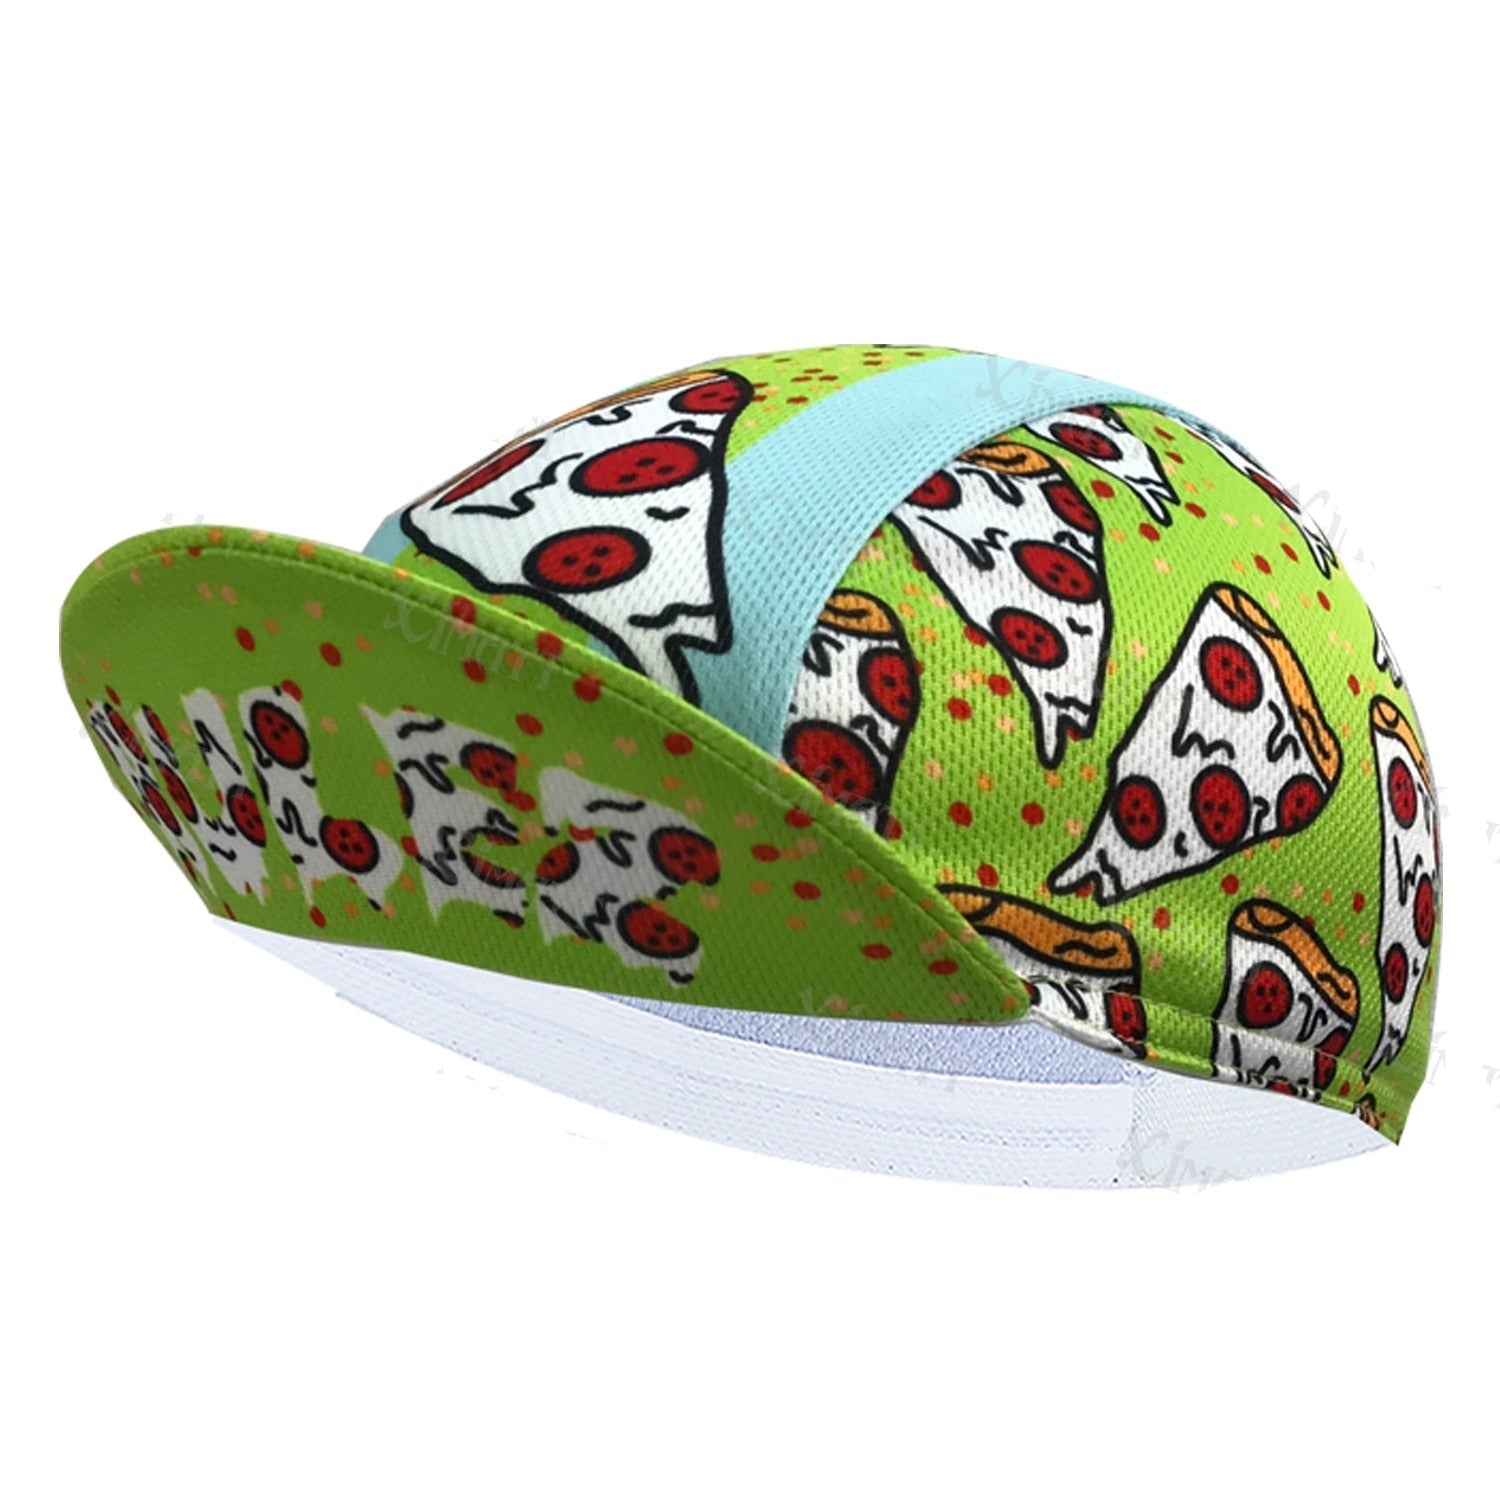 Classic  Retro Pizza Polyester Bicycle Women's And Men's Caps Green Quick Drying Breathable Apply To Road Bike Race